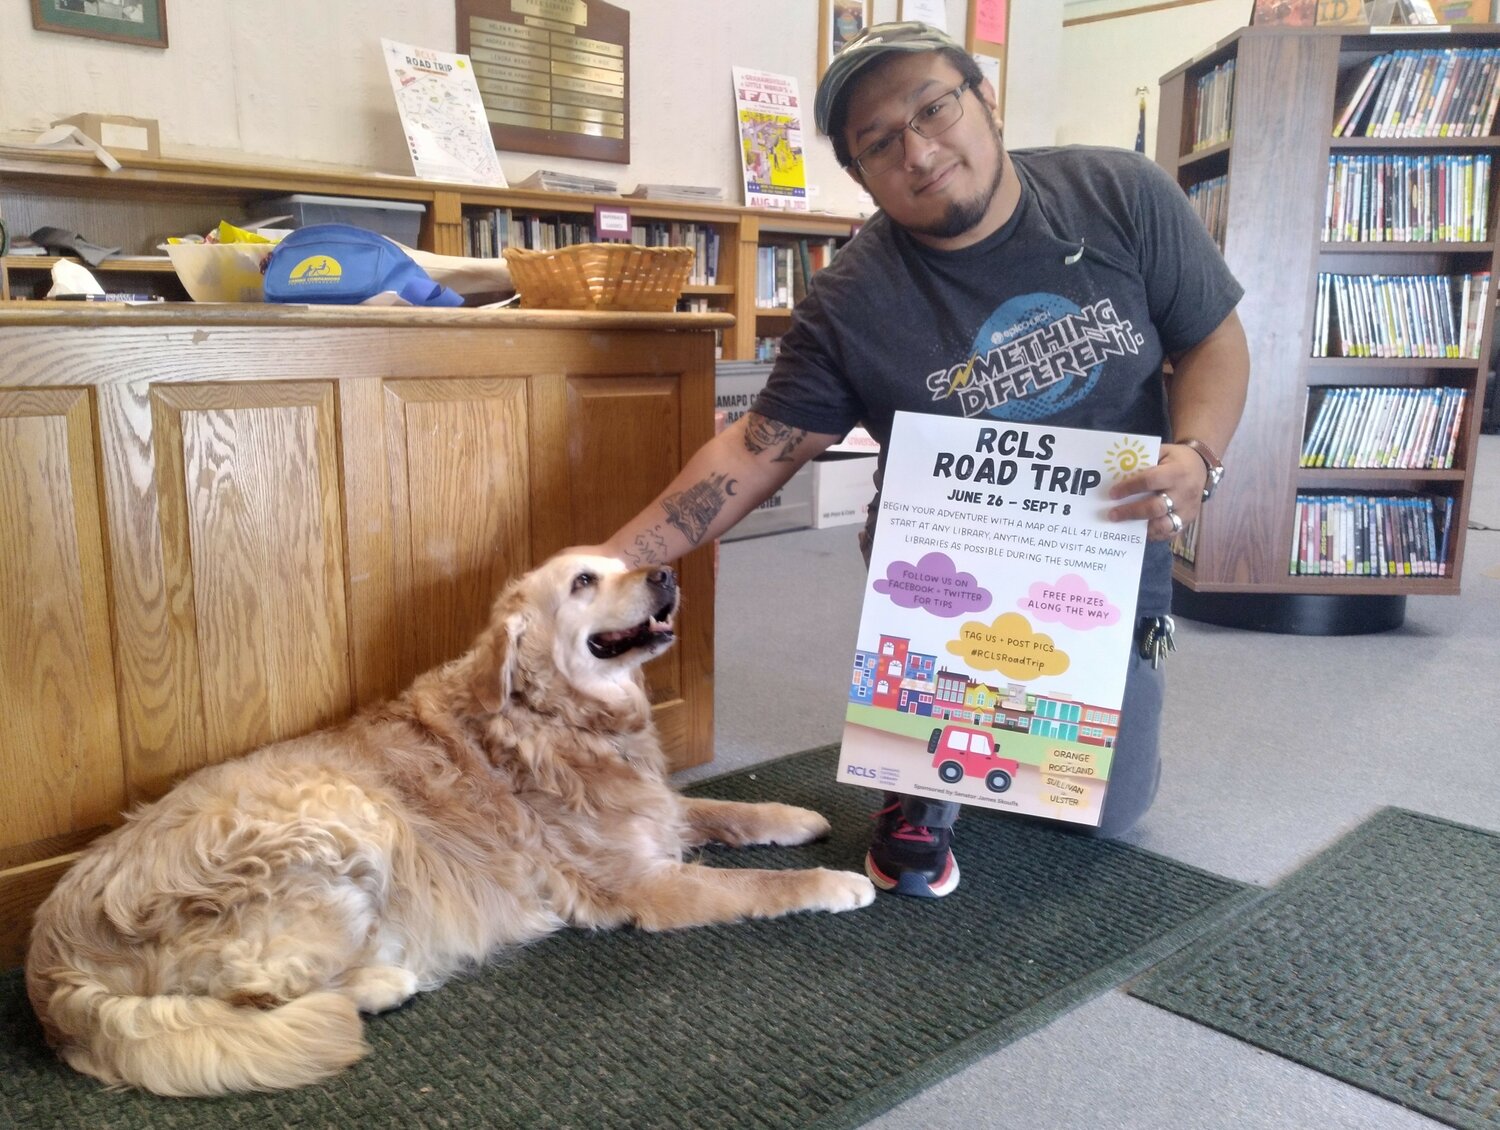 Michael Benedict recently visited the Sunshine Hall Free Library in Eldred, completing a tour of 47 area libraries. He was greeted by Camry, a volunteer at the library. ..